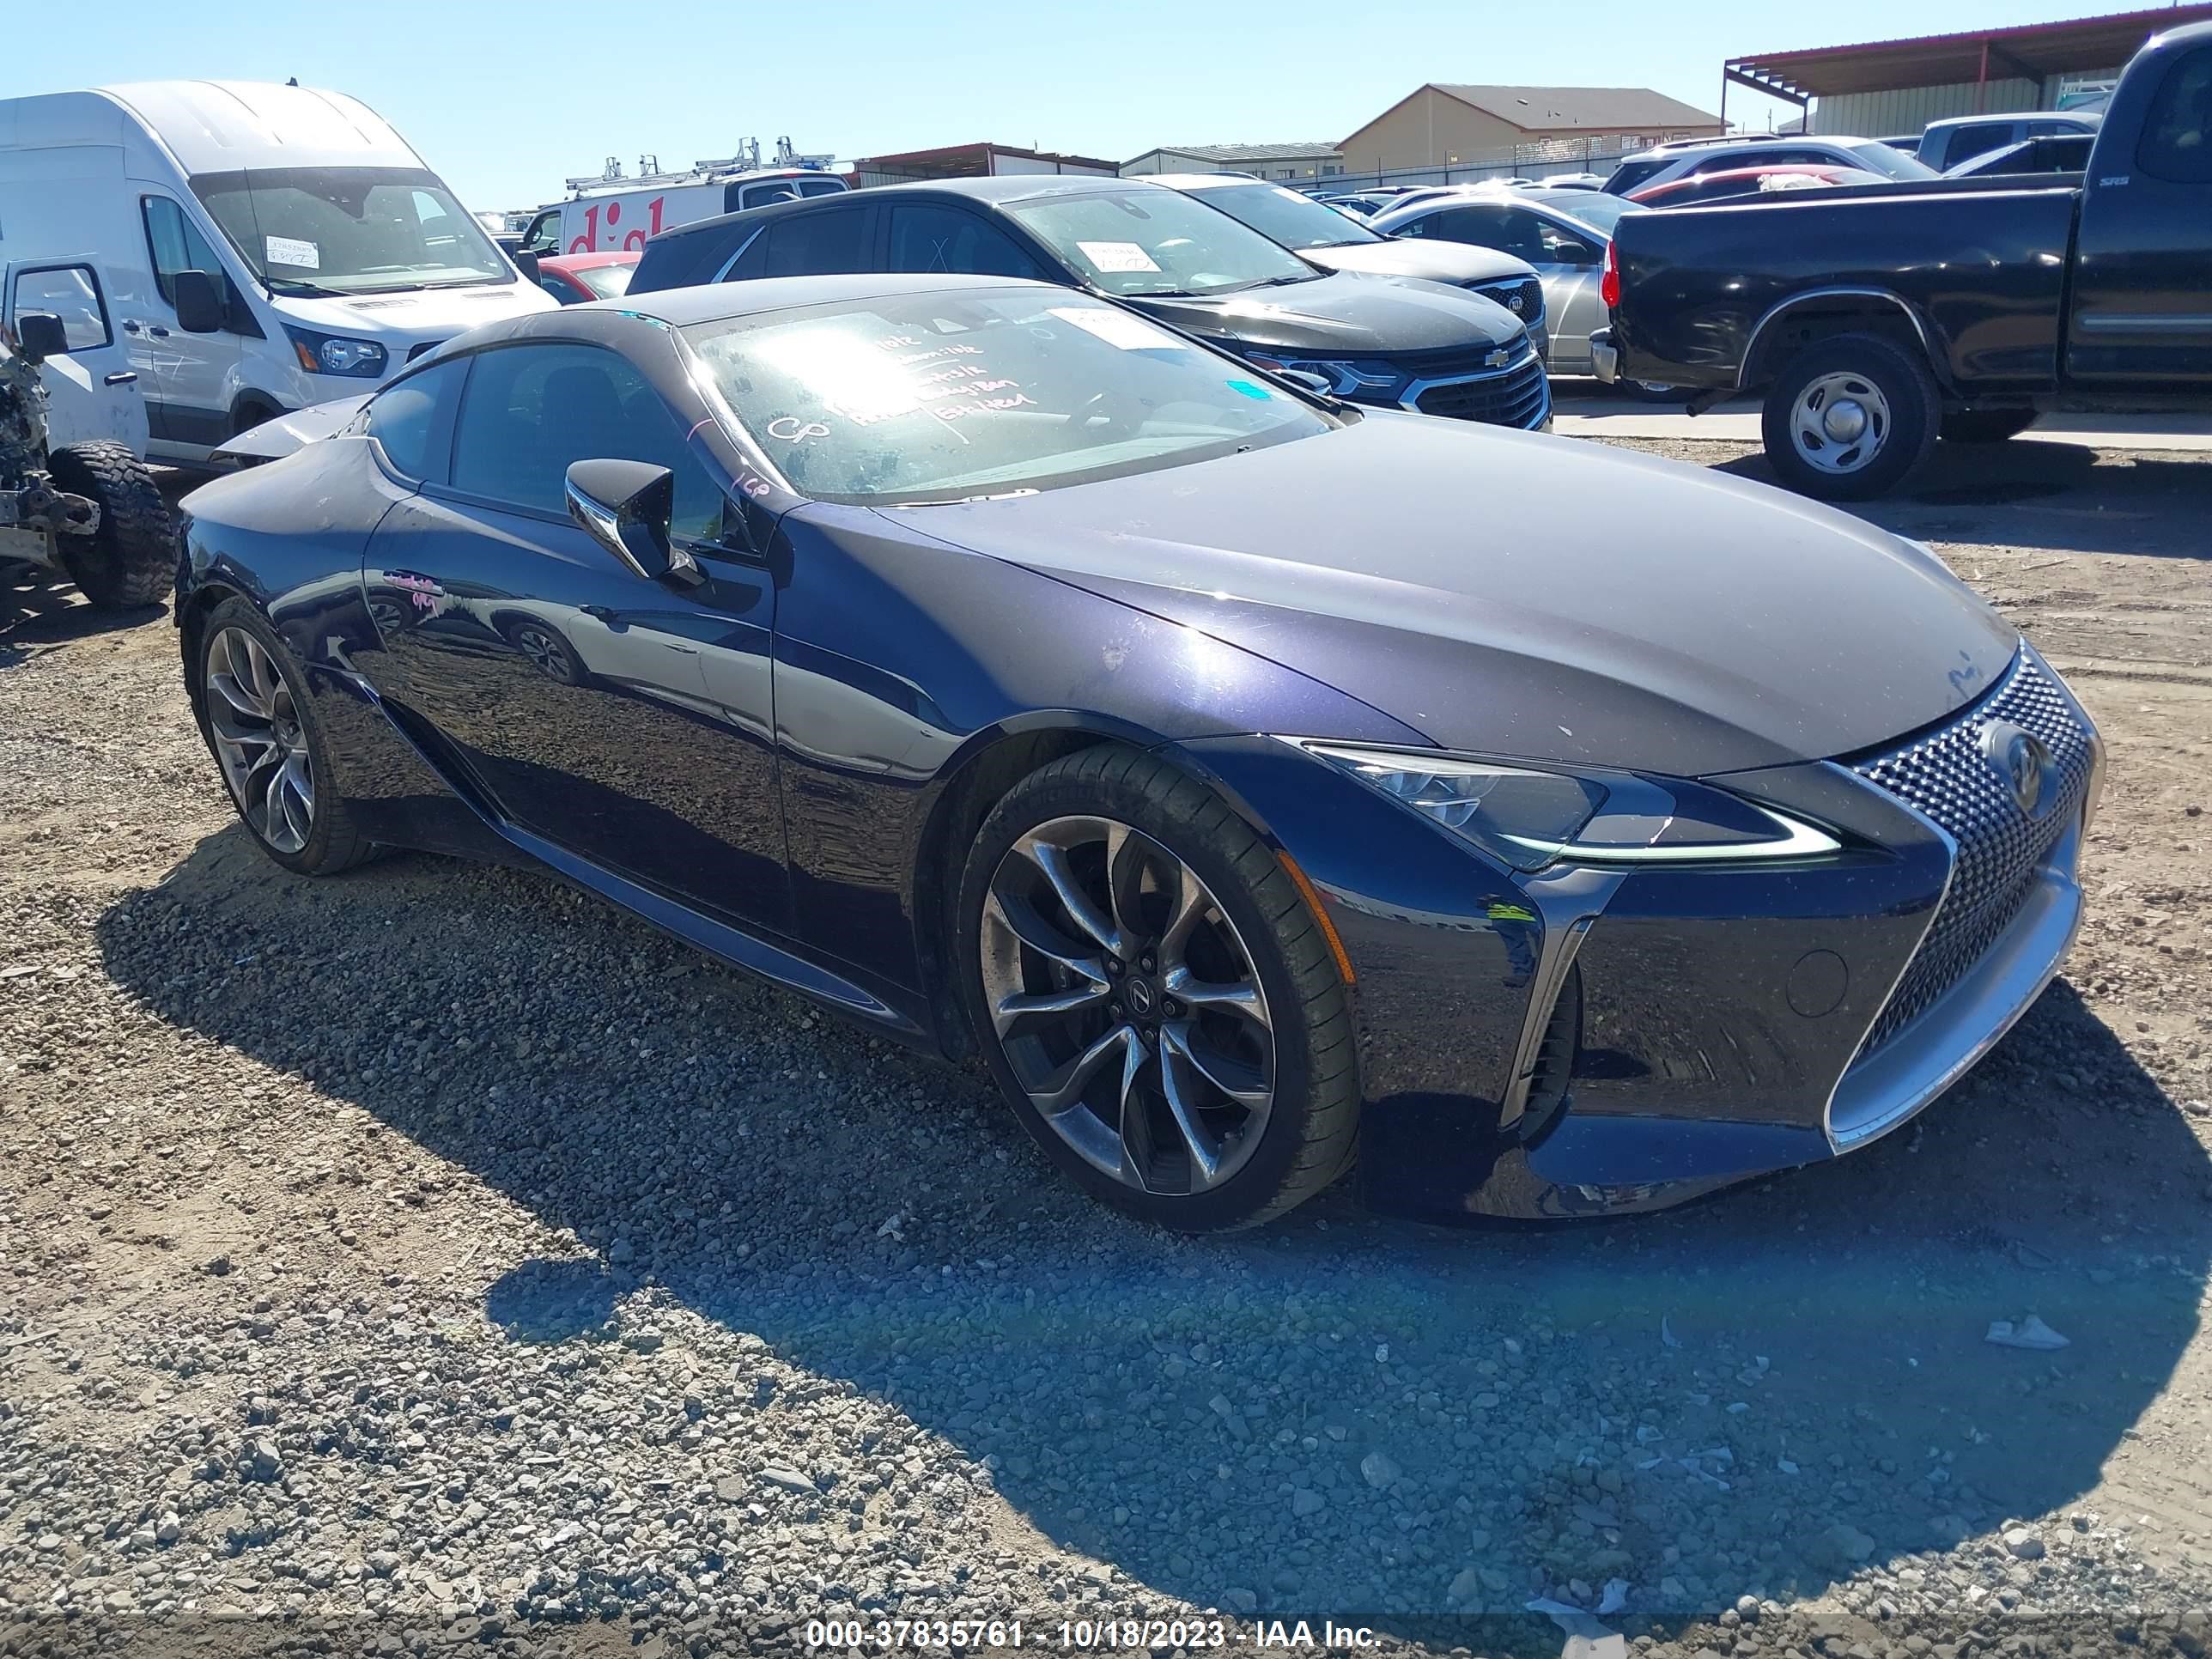 vin: JTHAP5AY7MA100290 JTHAP5AY7MA100290 2021 lexus lc 5000 for Sale in 78616, 2191 Highway 21 West, Dale, USA